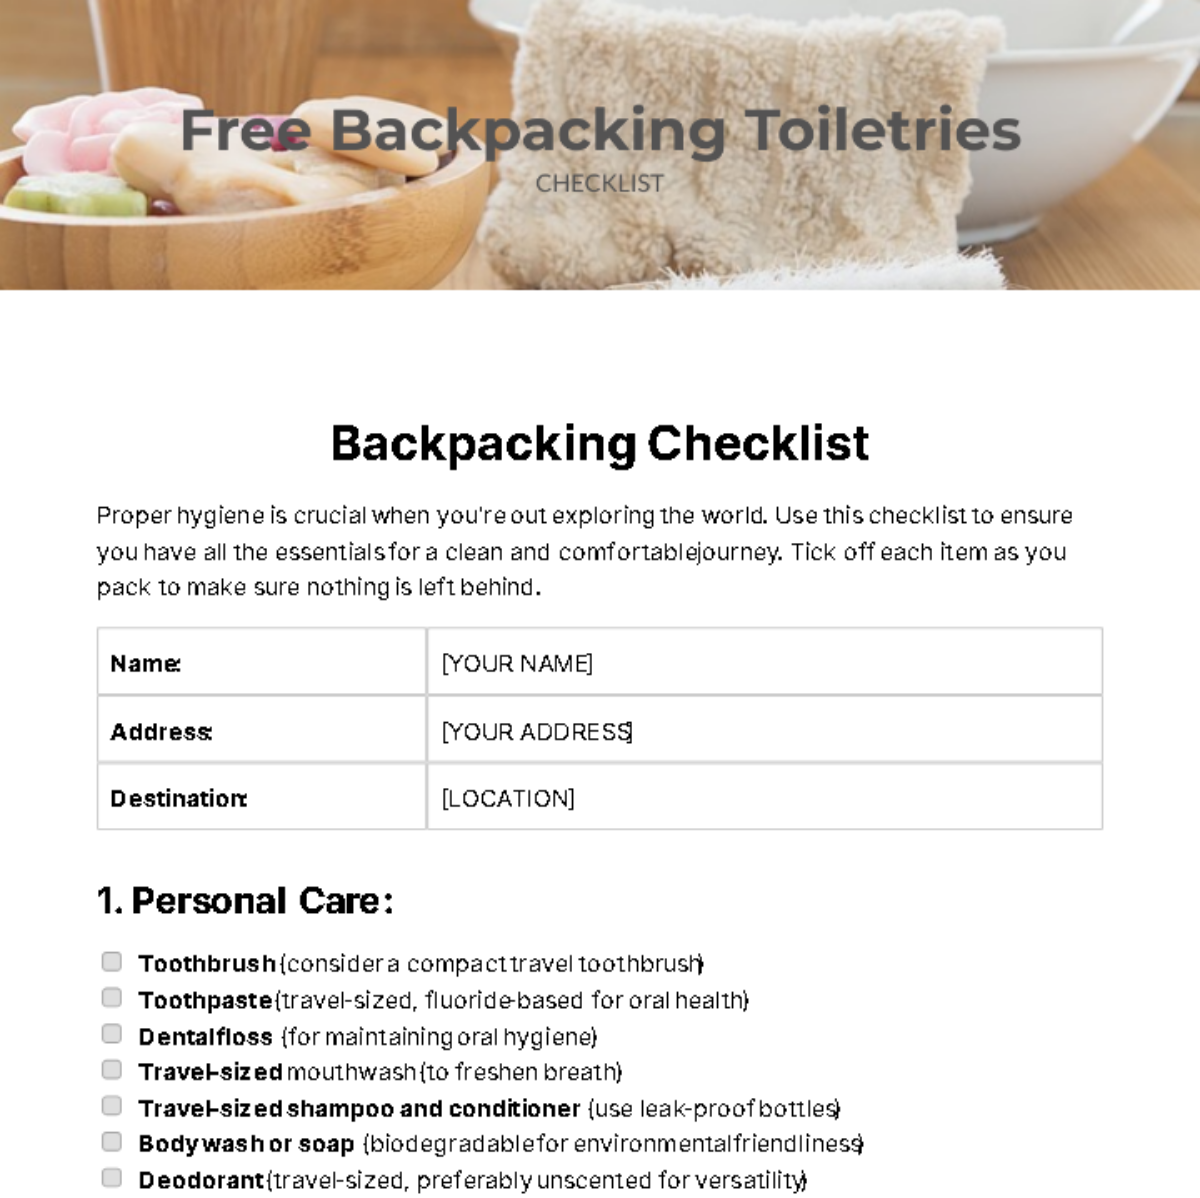 Backpacking Toiletries Checklist Template